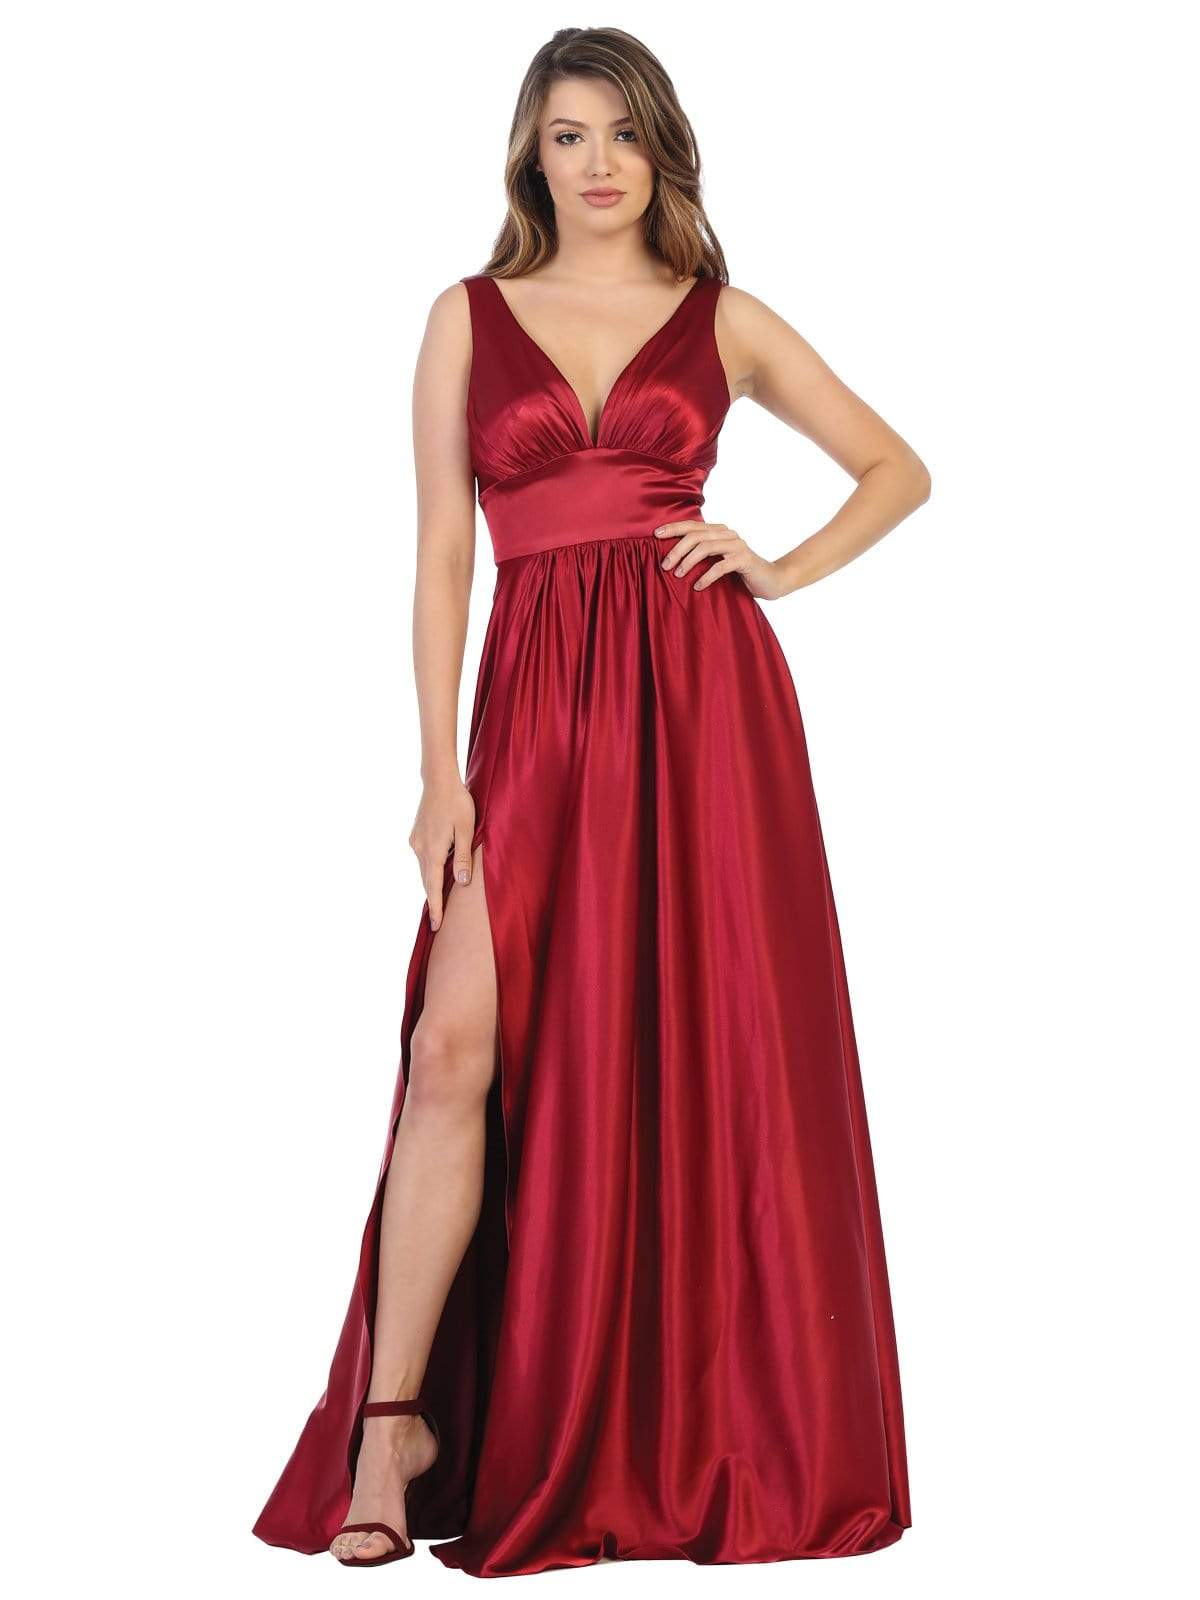 May Queen - MQ1723 Plunging V-Neck Empire High Slit Dress